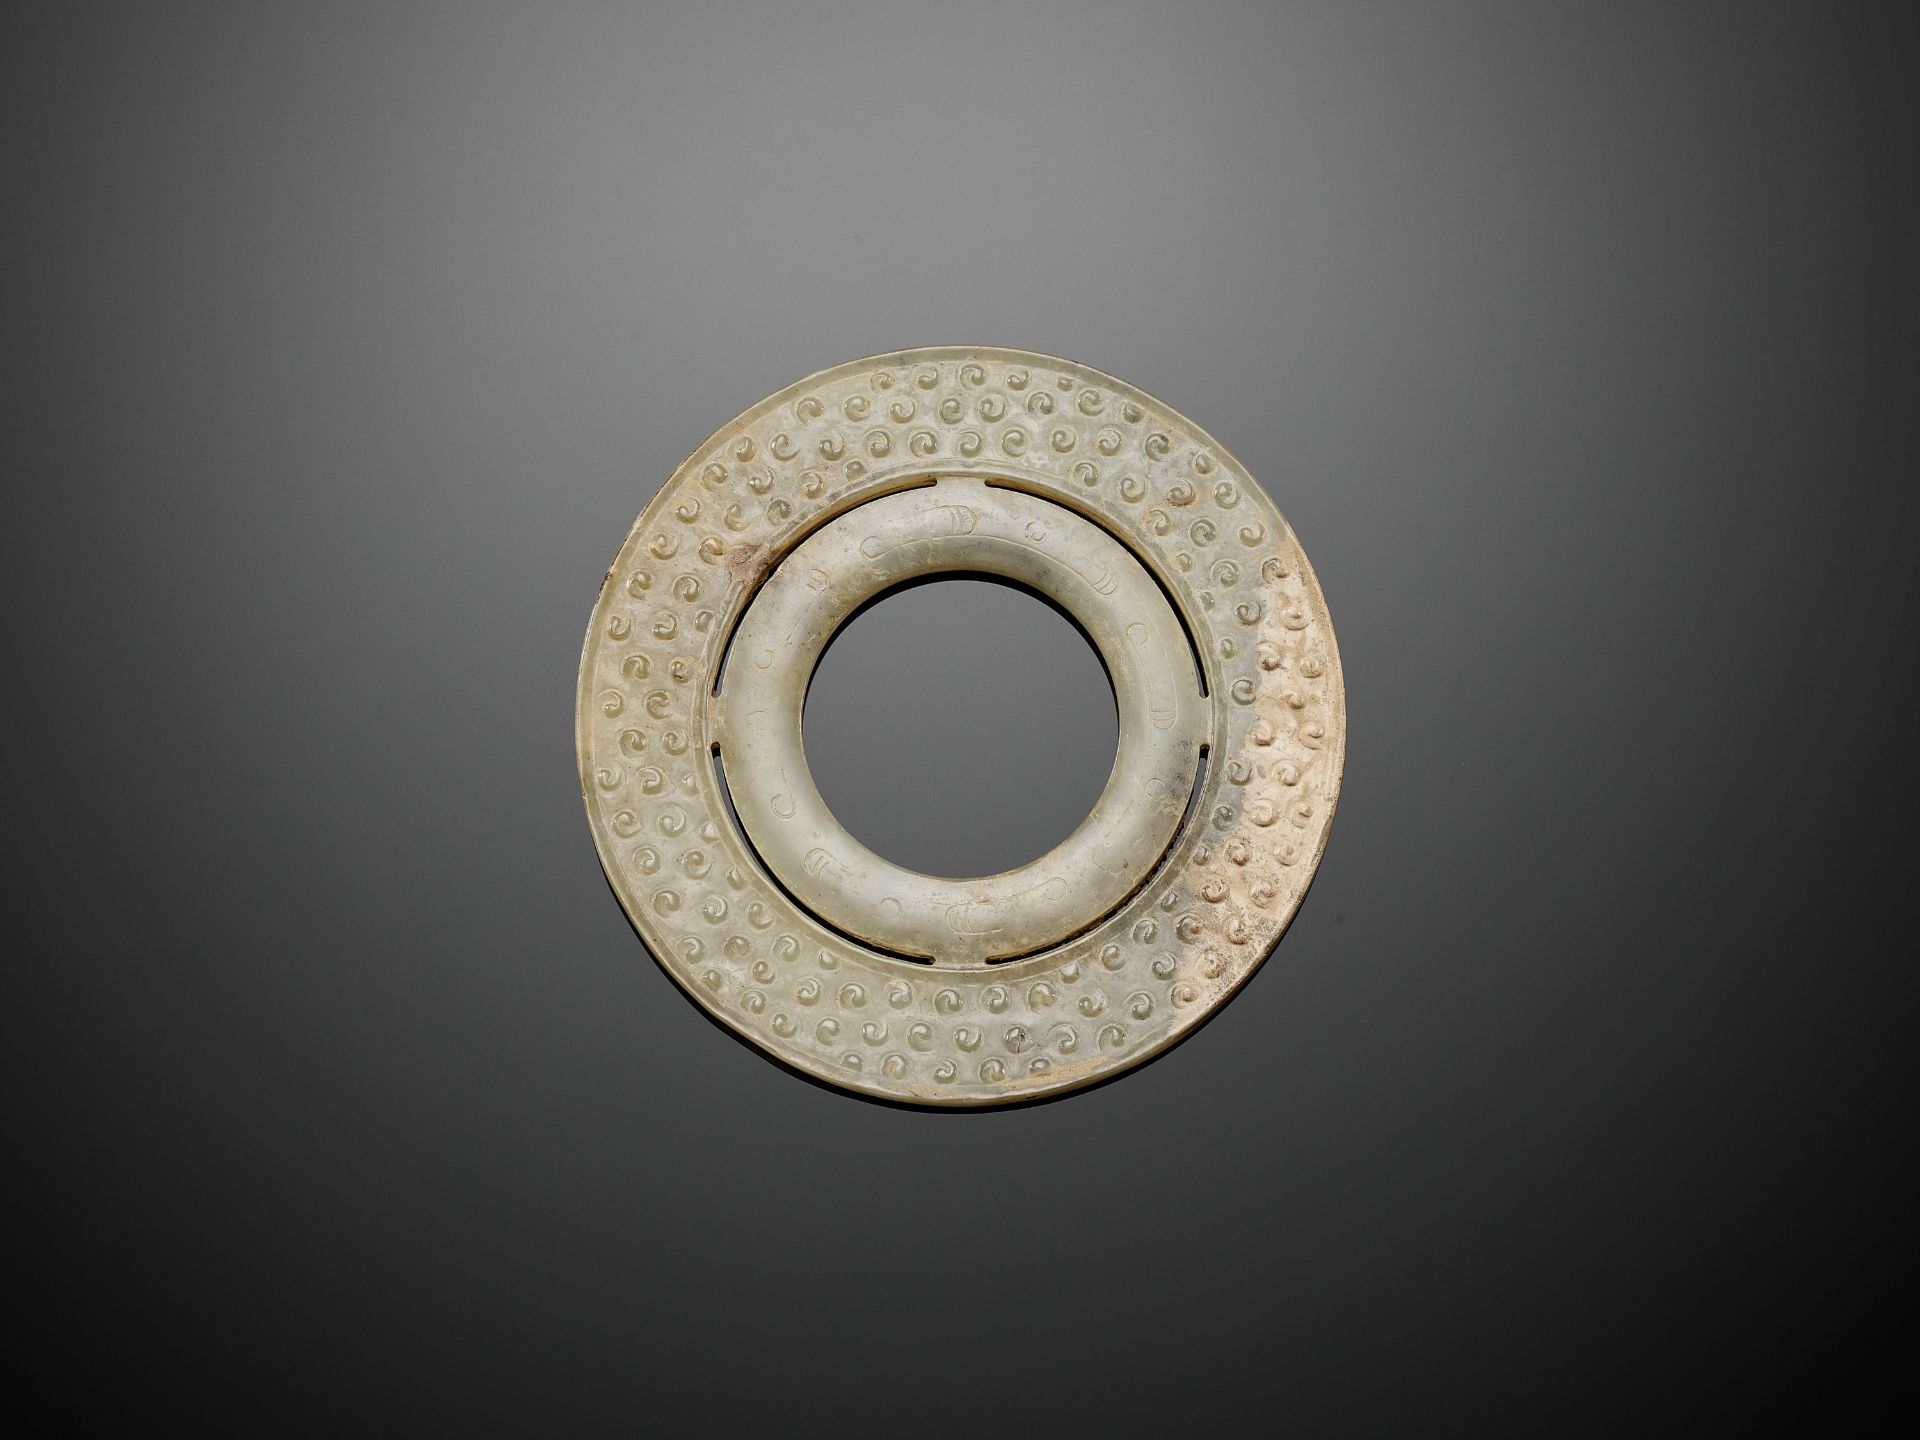 A JADE DOUBLE DISK, BI, WARRING STATES TO WESTERN HAN DYNASTY